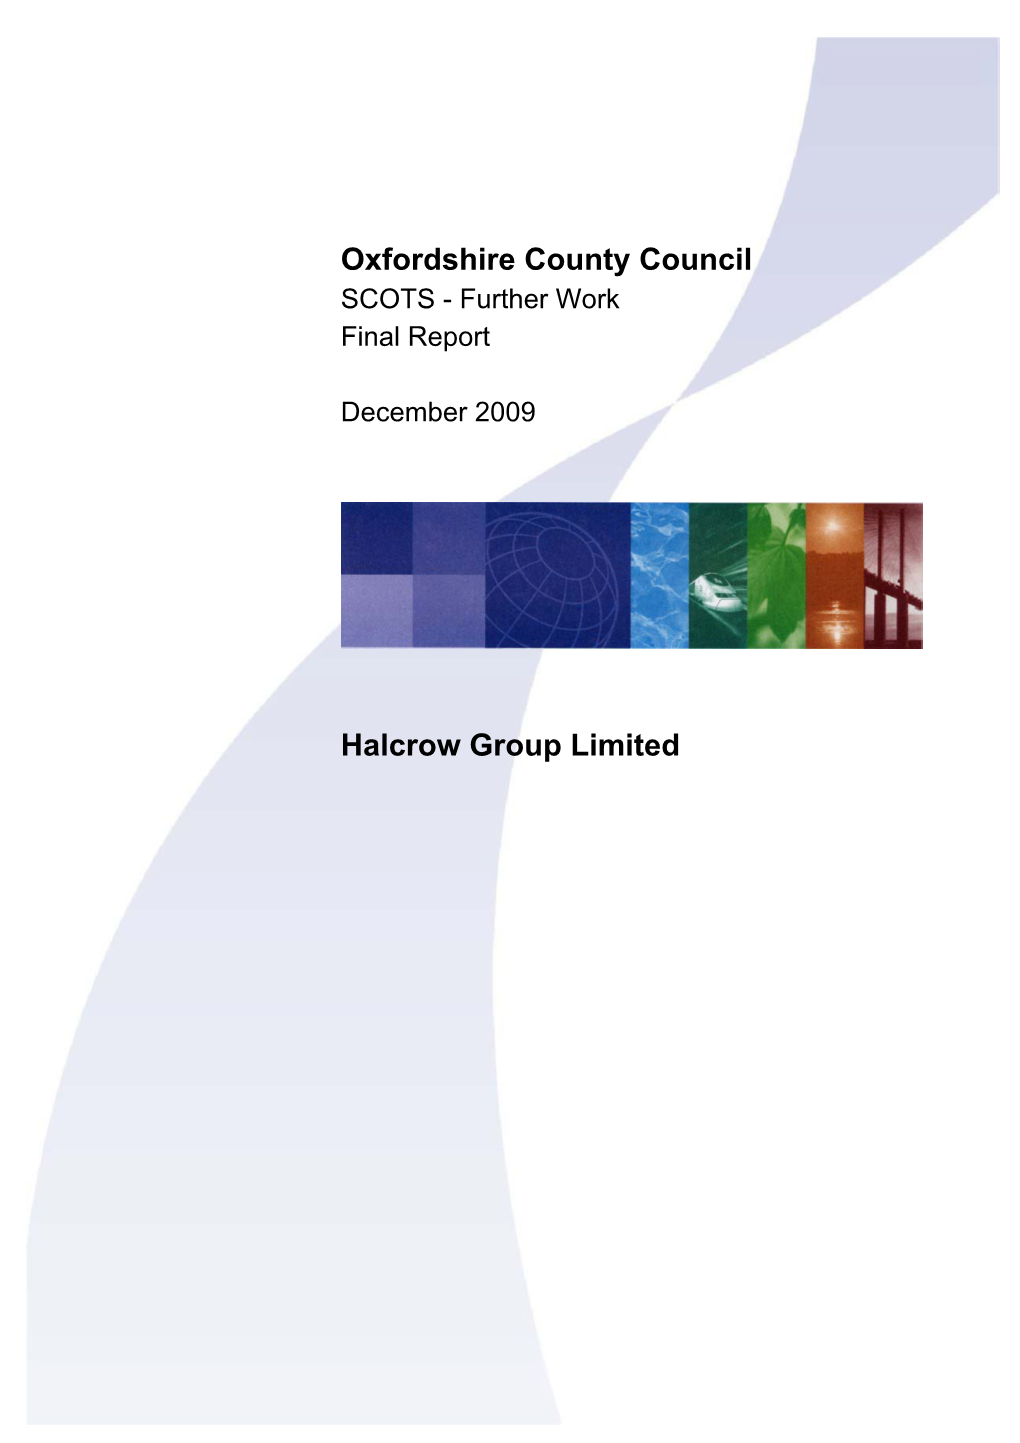 Oxfordshire County Council Halcrow Group Limited